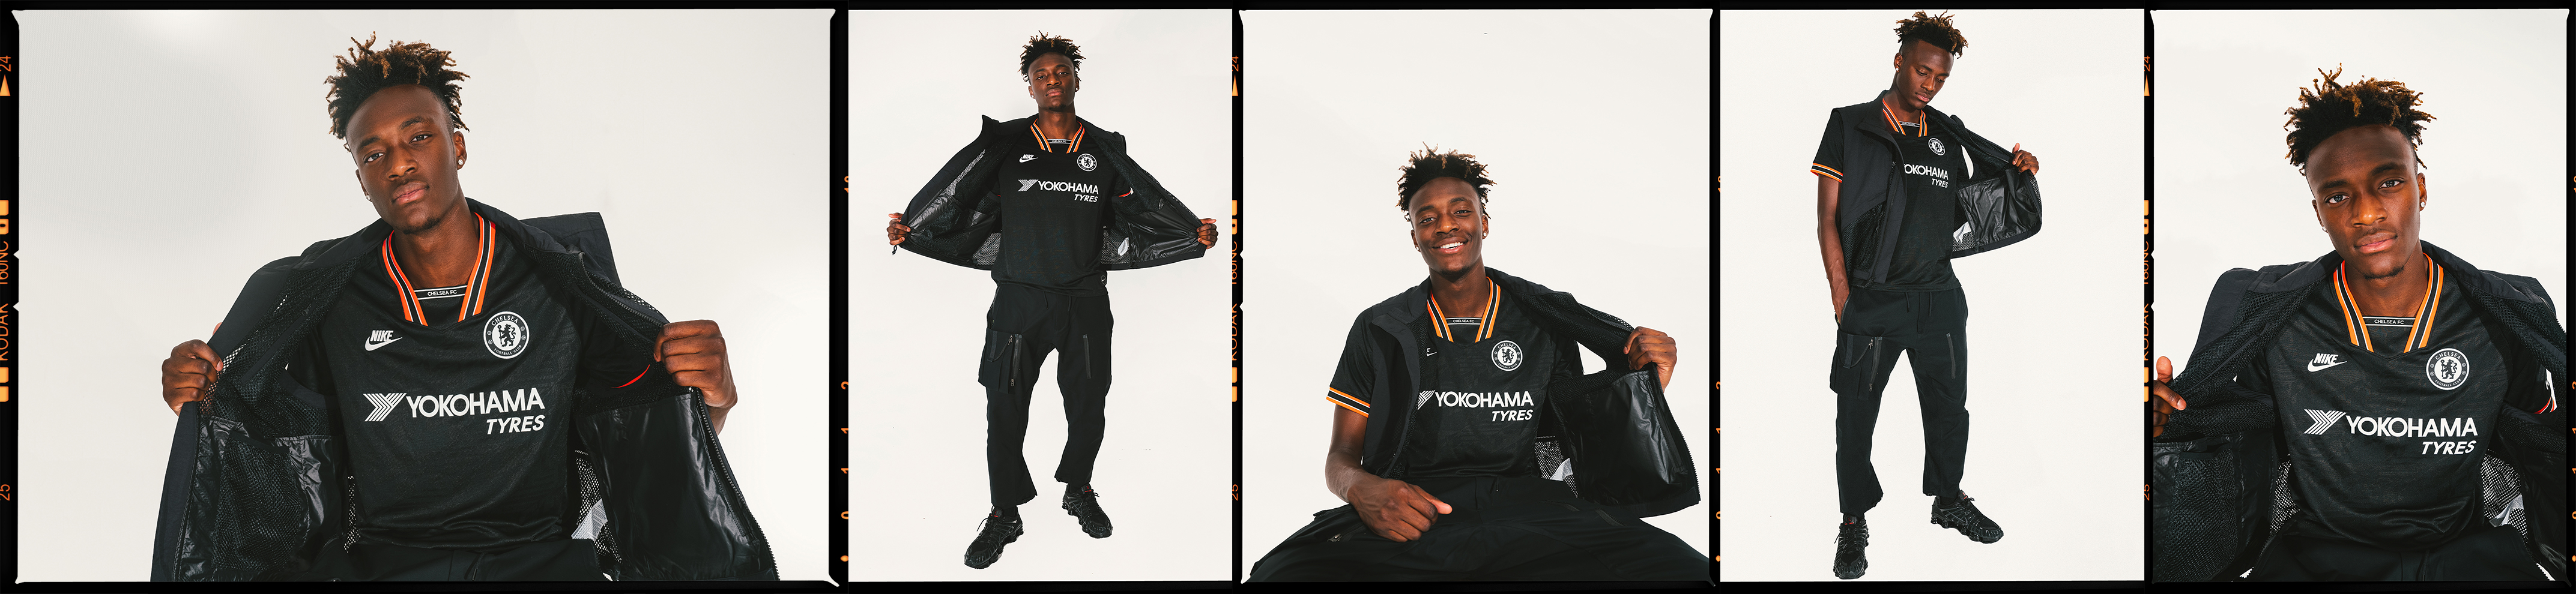 Meet Tammy Abraham [@tammyabraham] the 21-year old striker making his mark at Chelsea [@chelseafc]